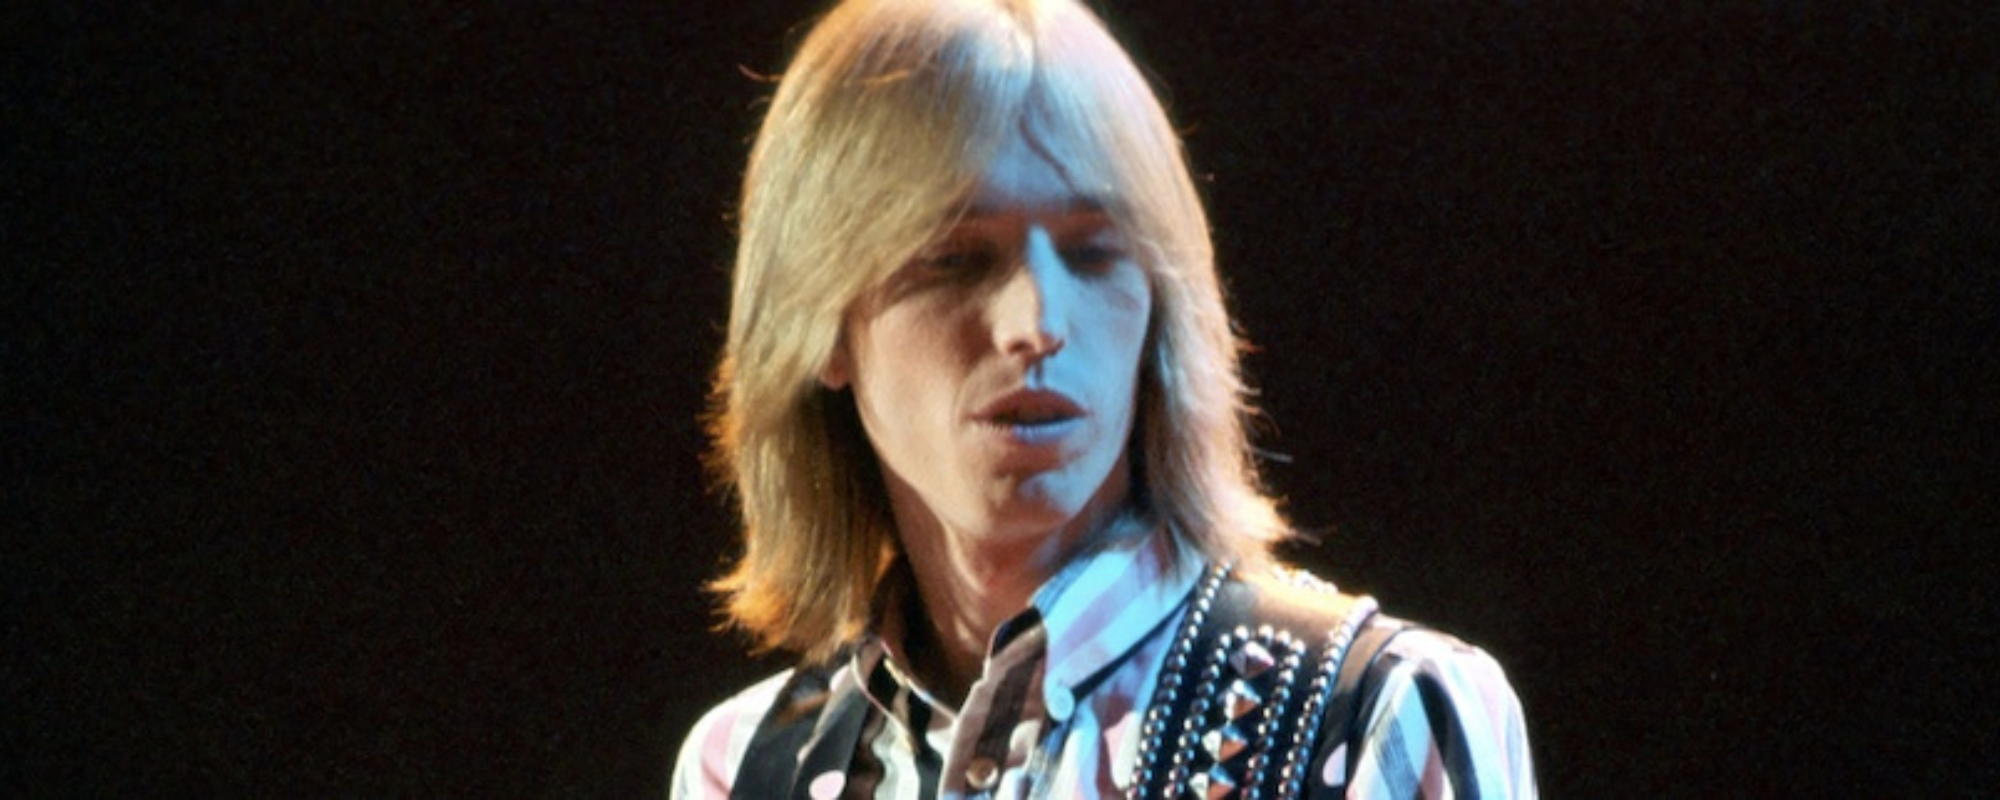 5 Hit Songs You Didn’t Know Tom Petty Wrote Solo